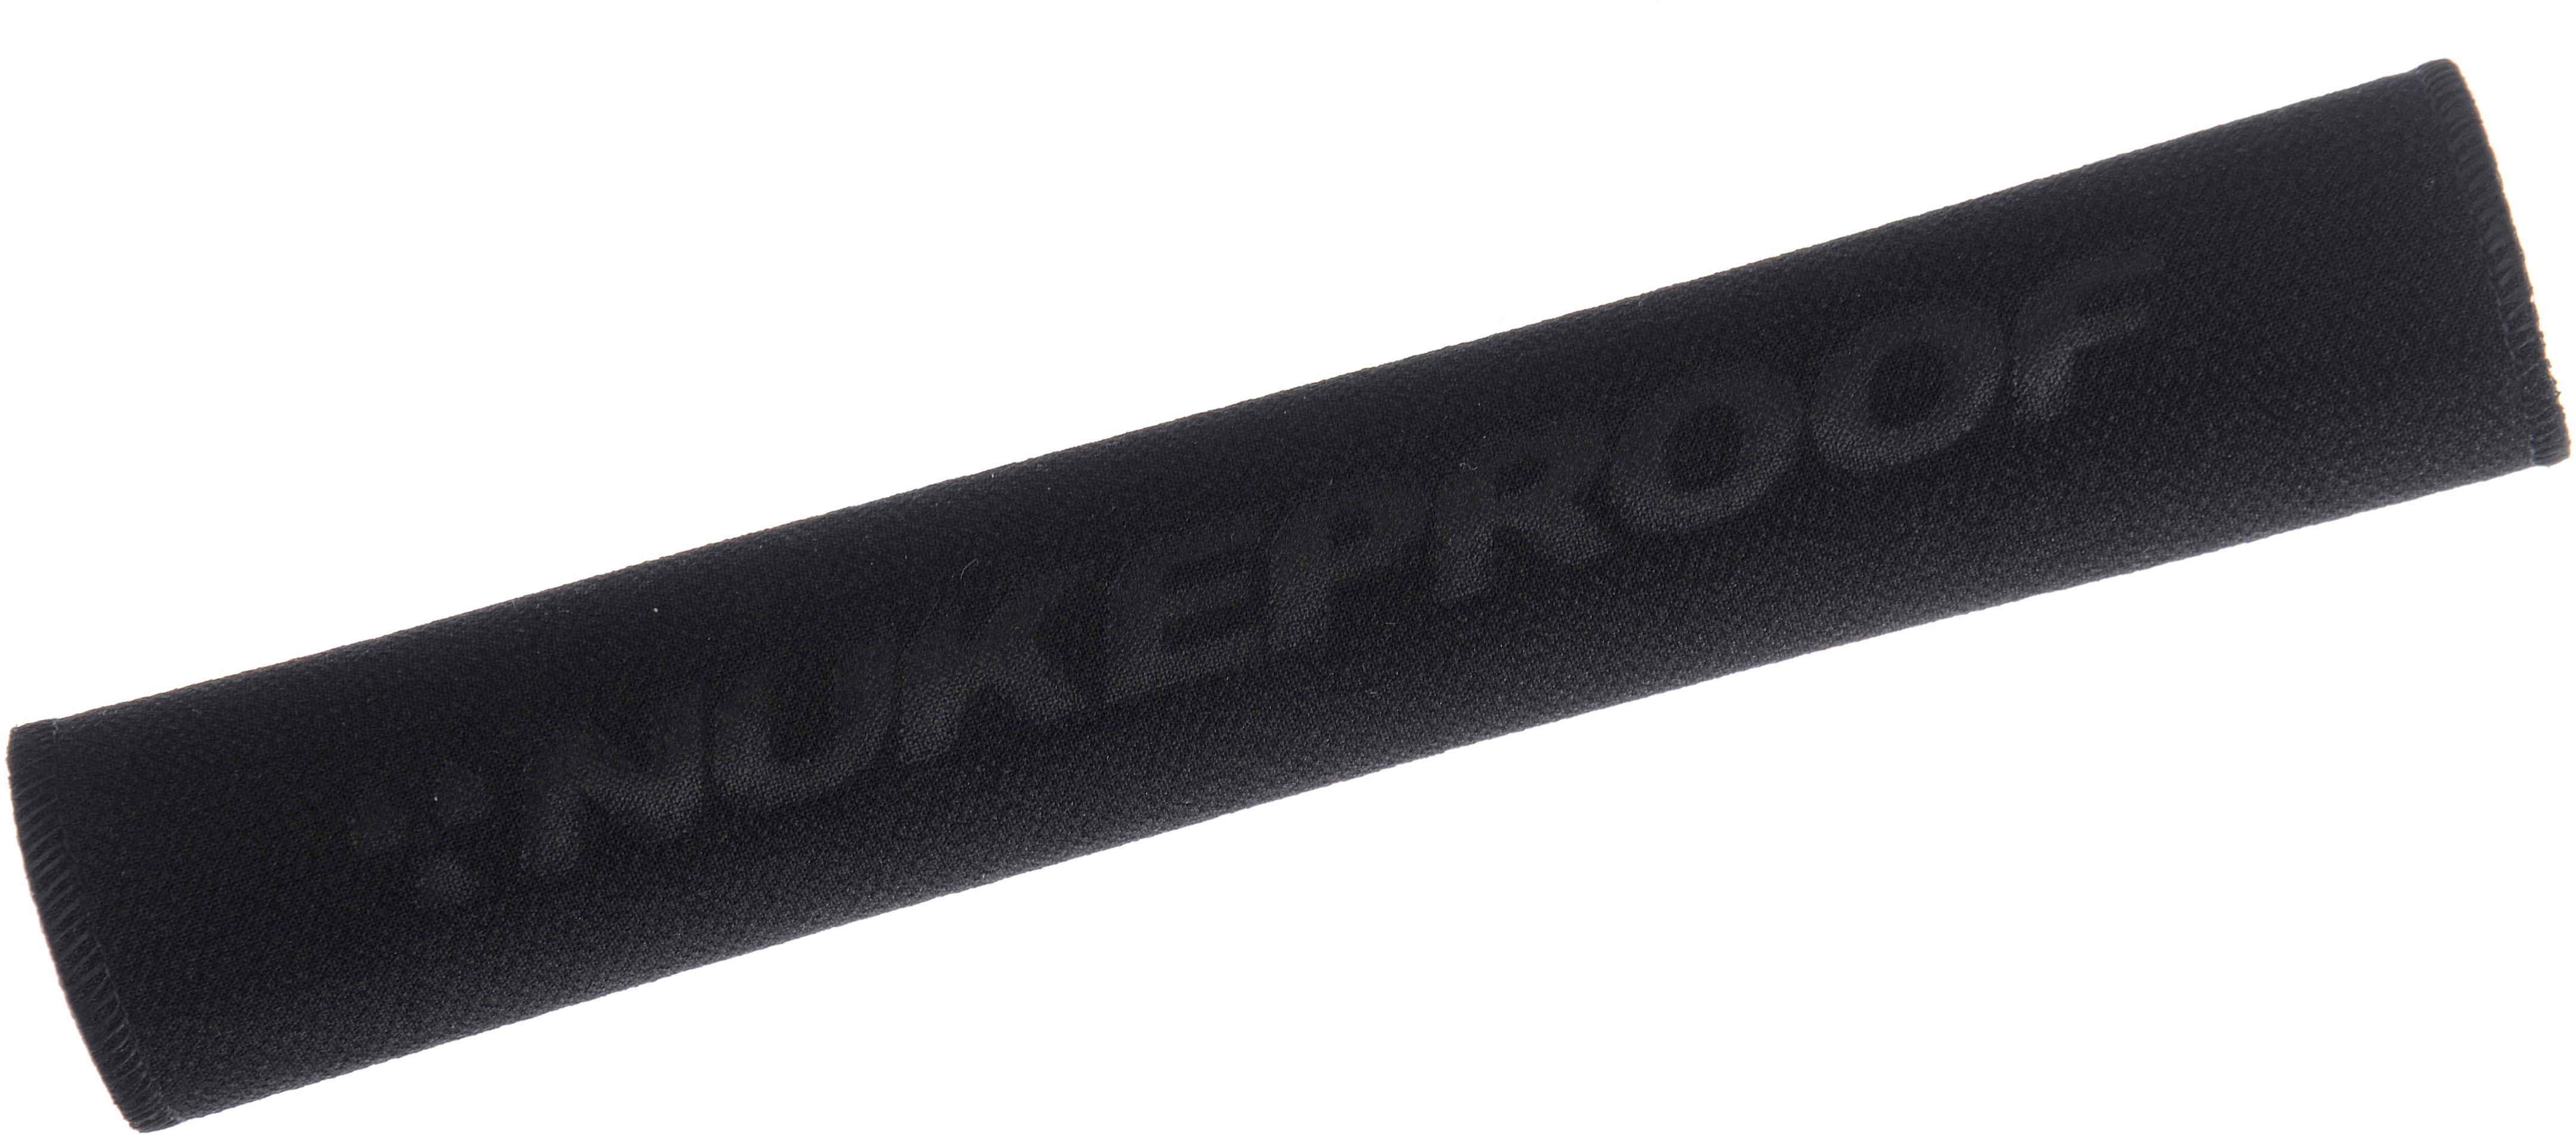 Nukeproof Kevlar Chainstay Protector - Black